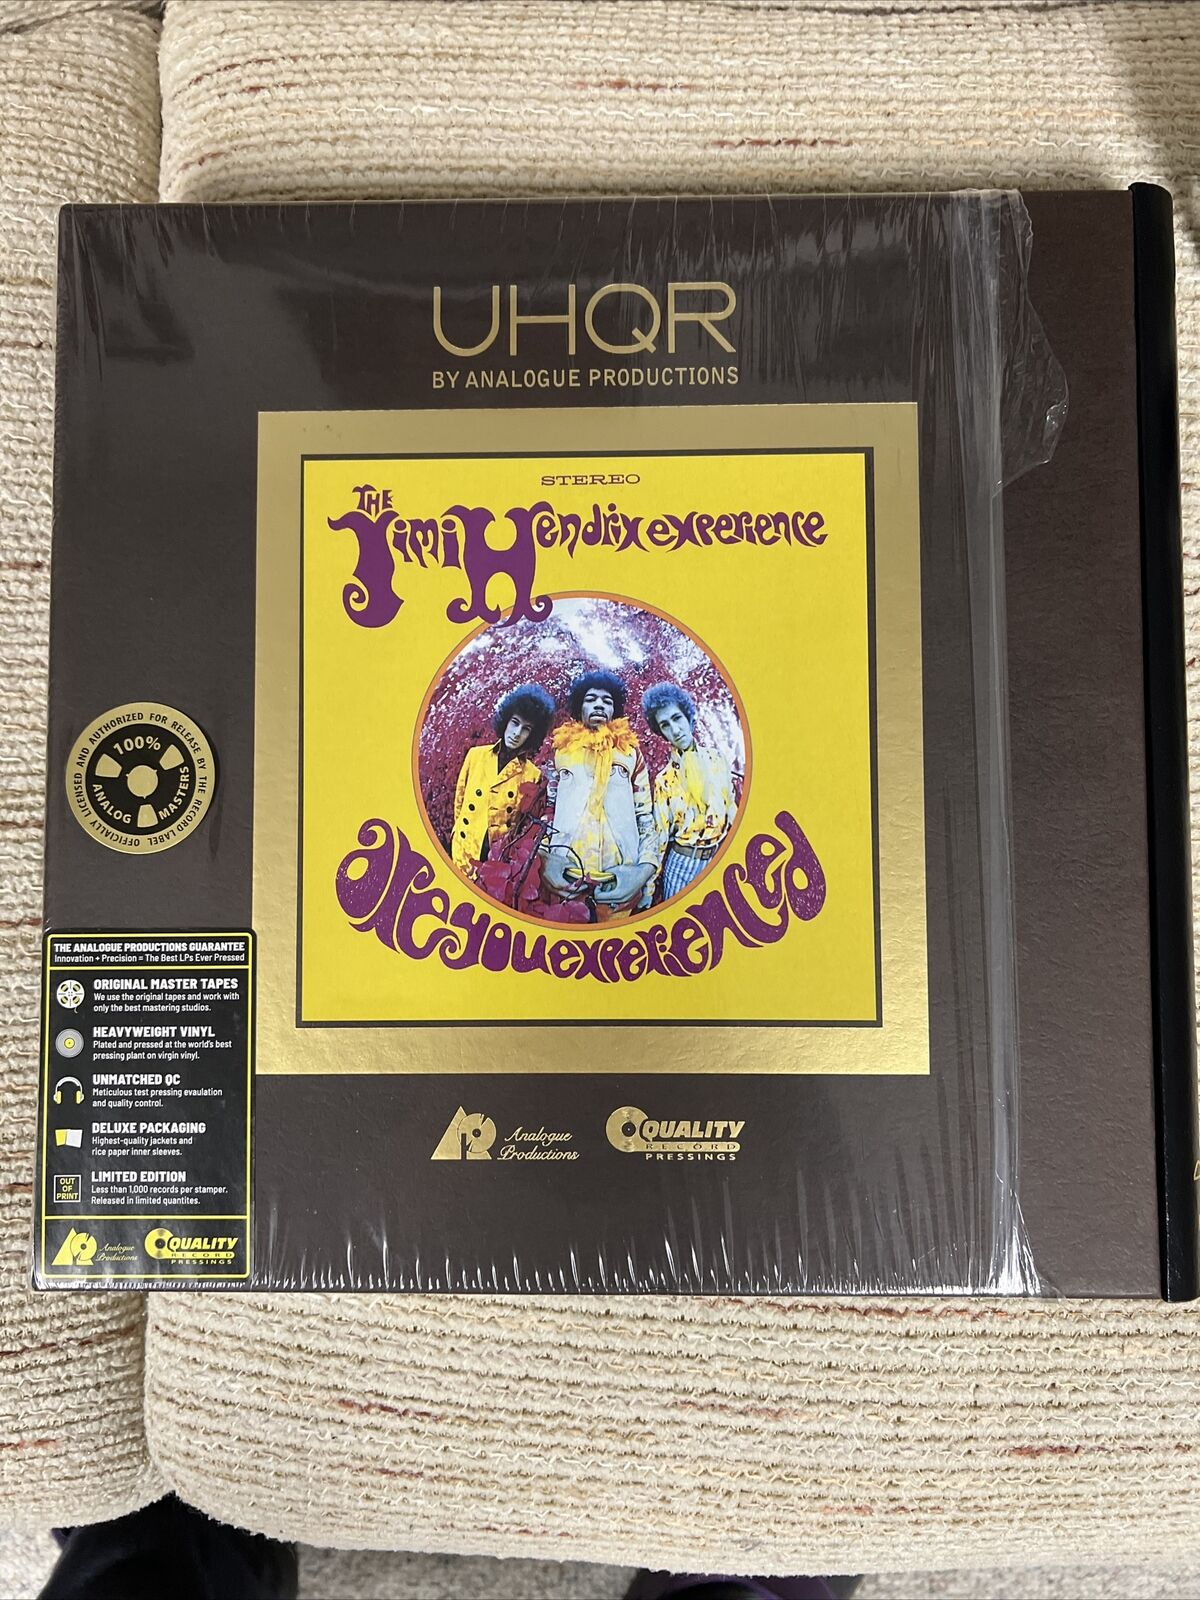 Jimi Hendrix UHQR Are You Experienced Analogue Productions - NM/NM